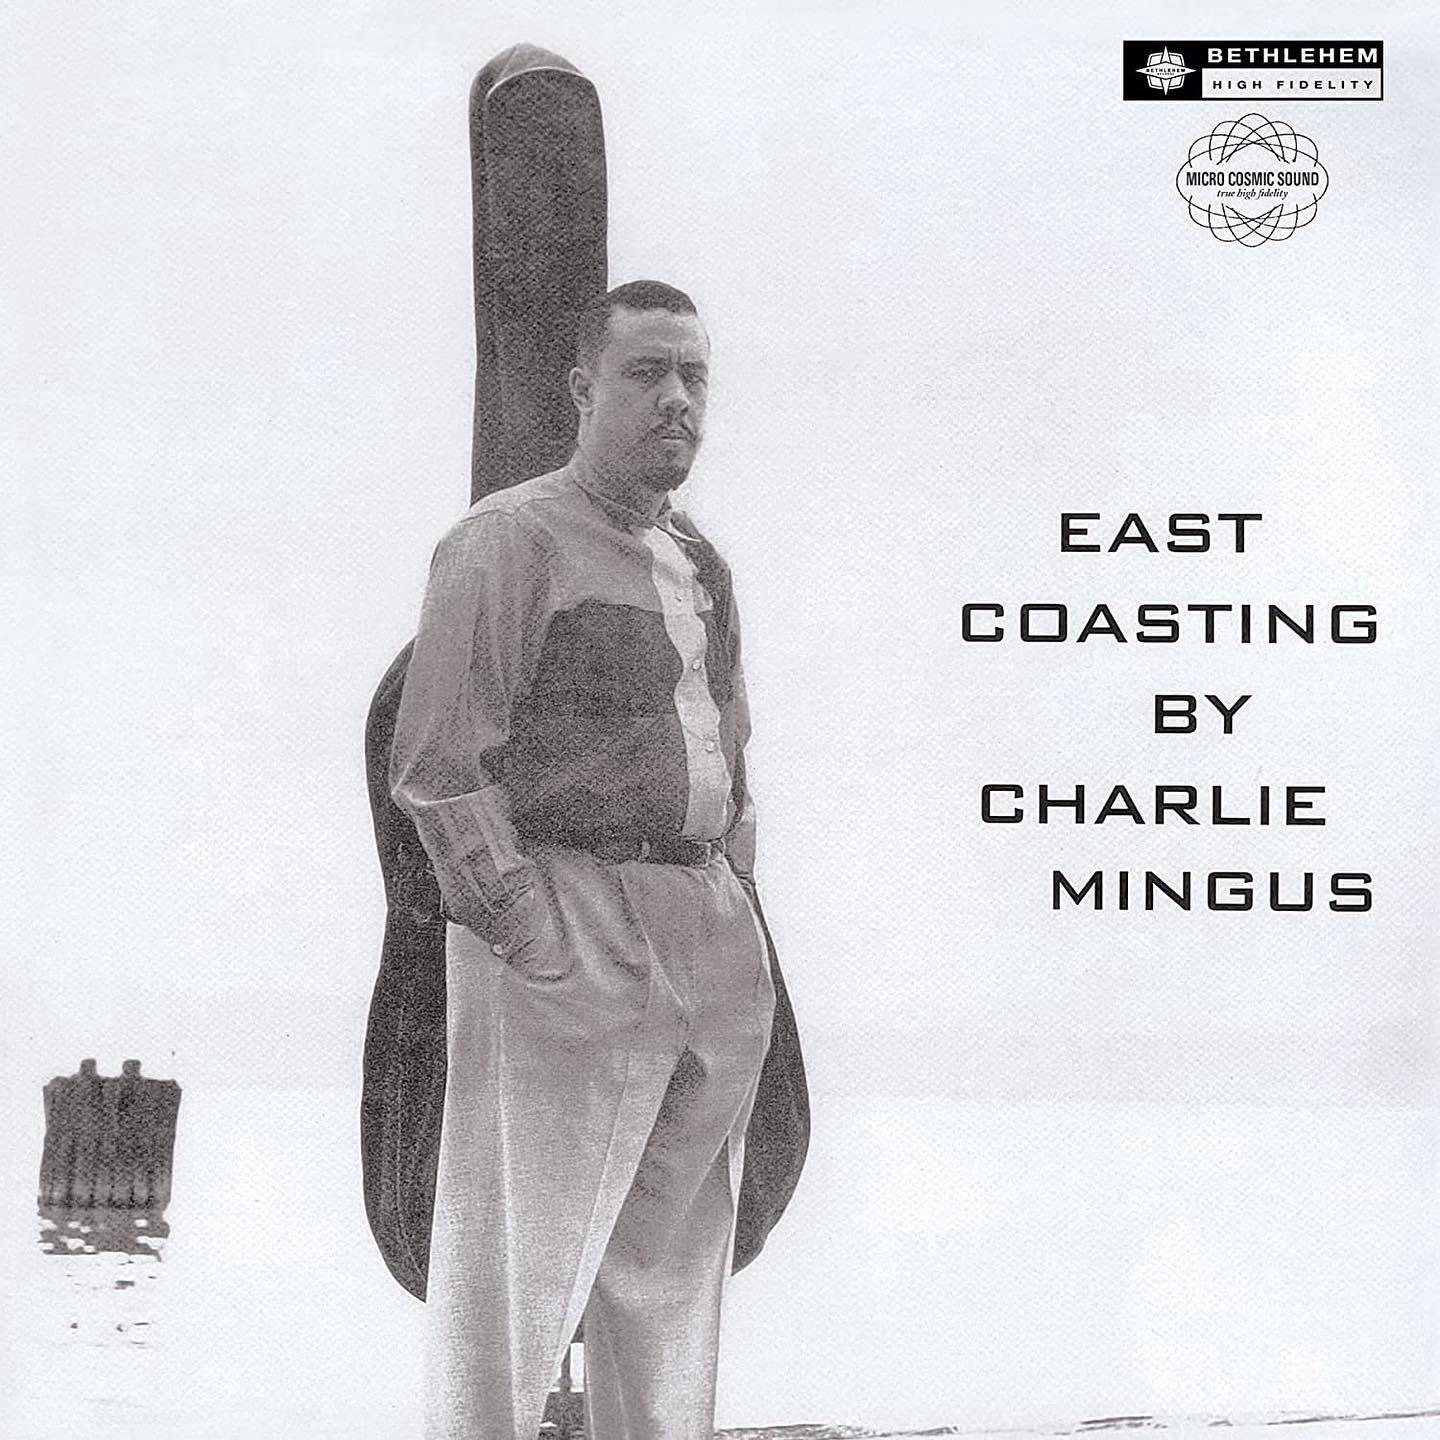 image  1 Recorded and released in 1957, East Coasting is an unpredictable and explorative album